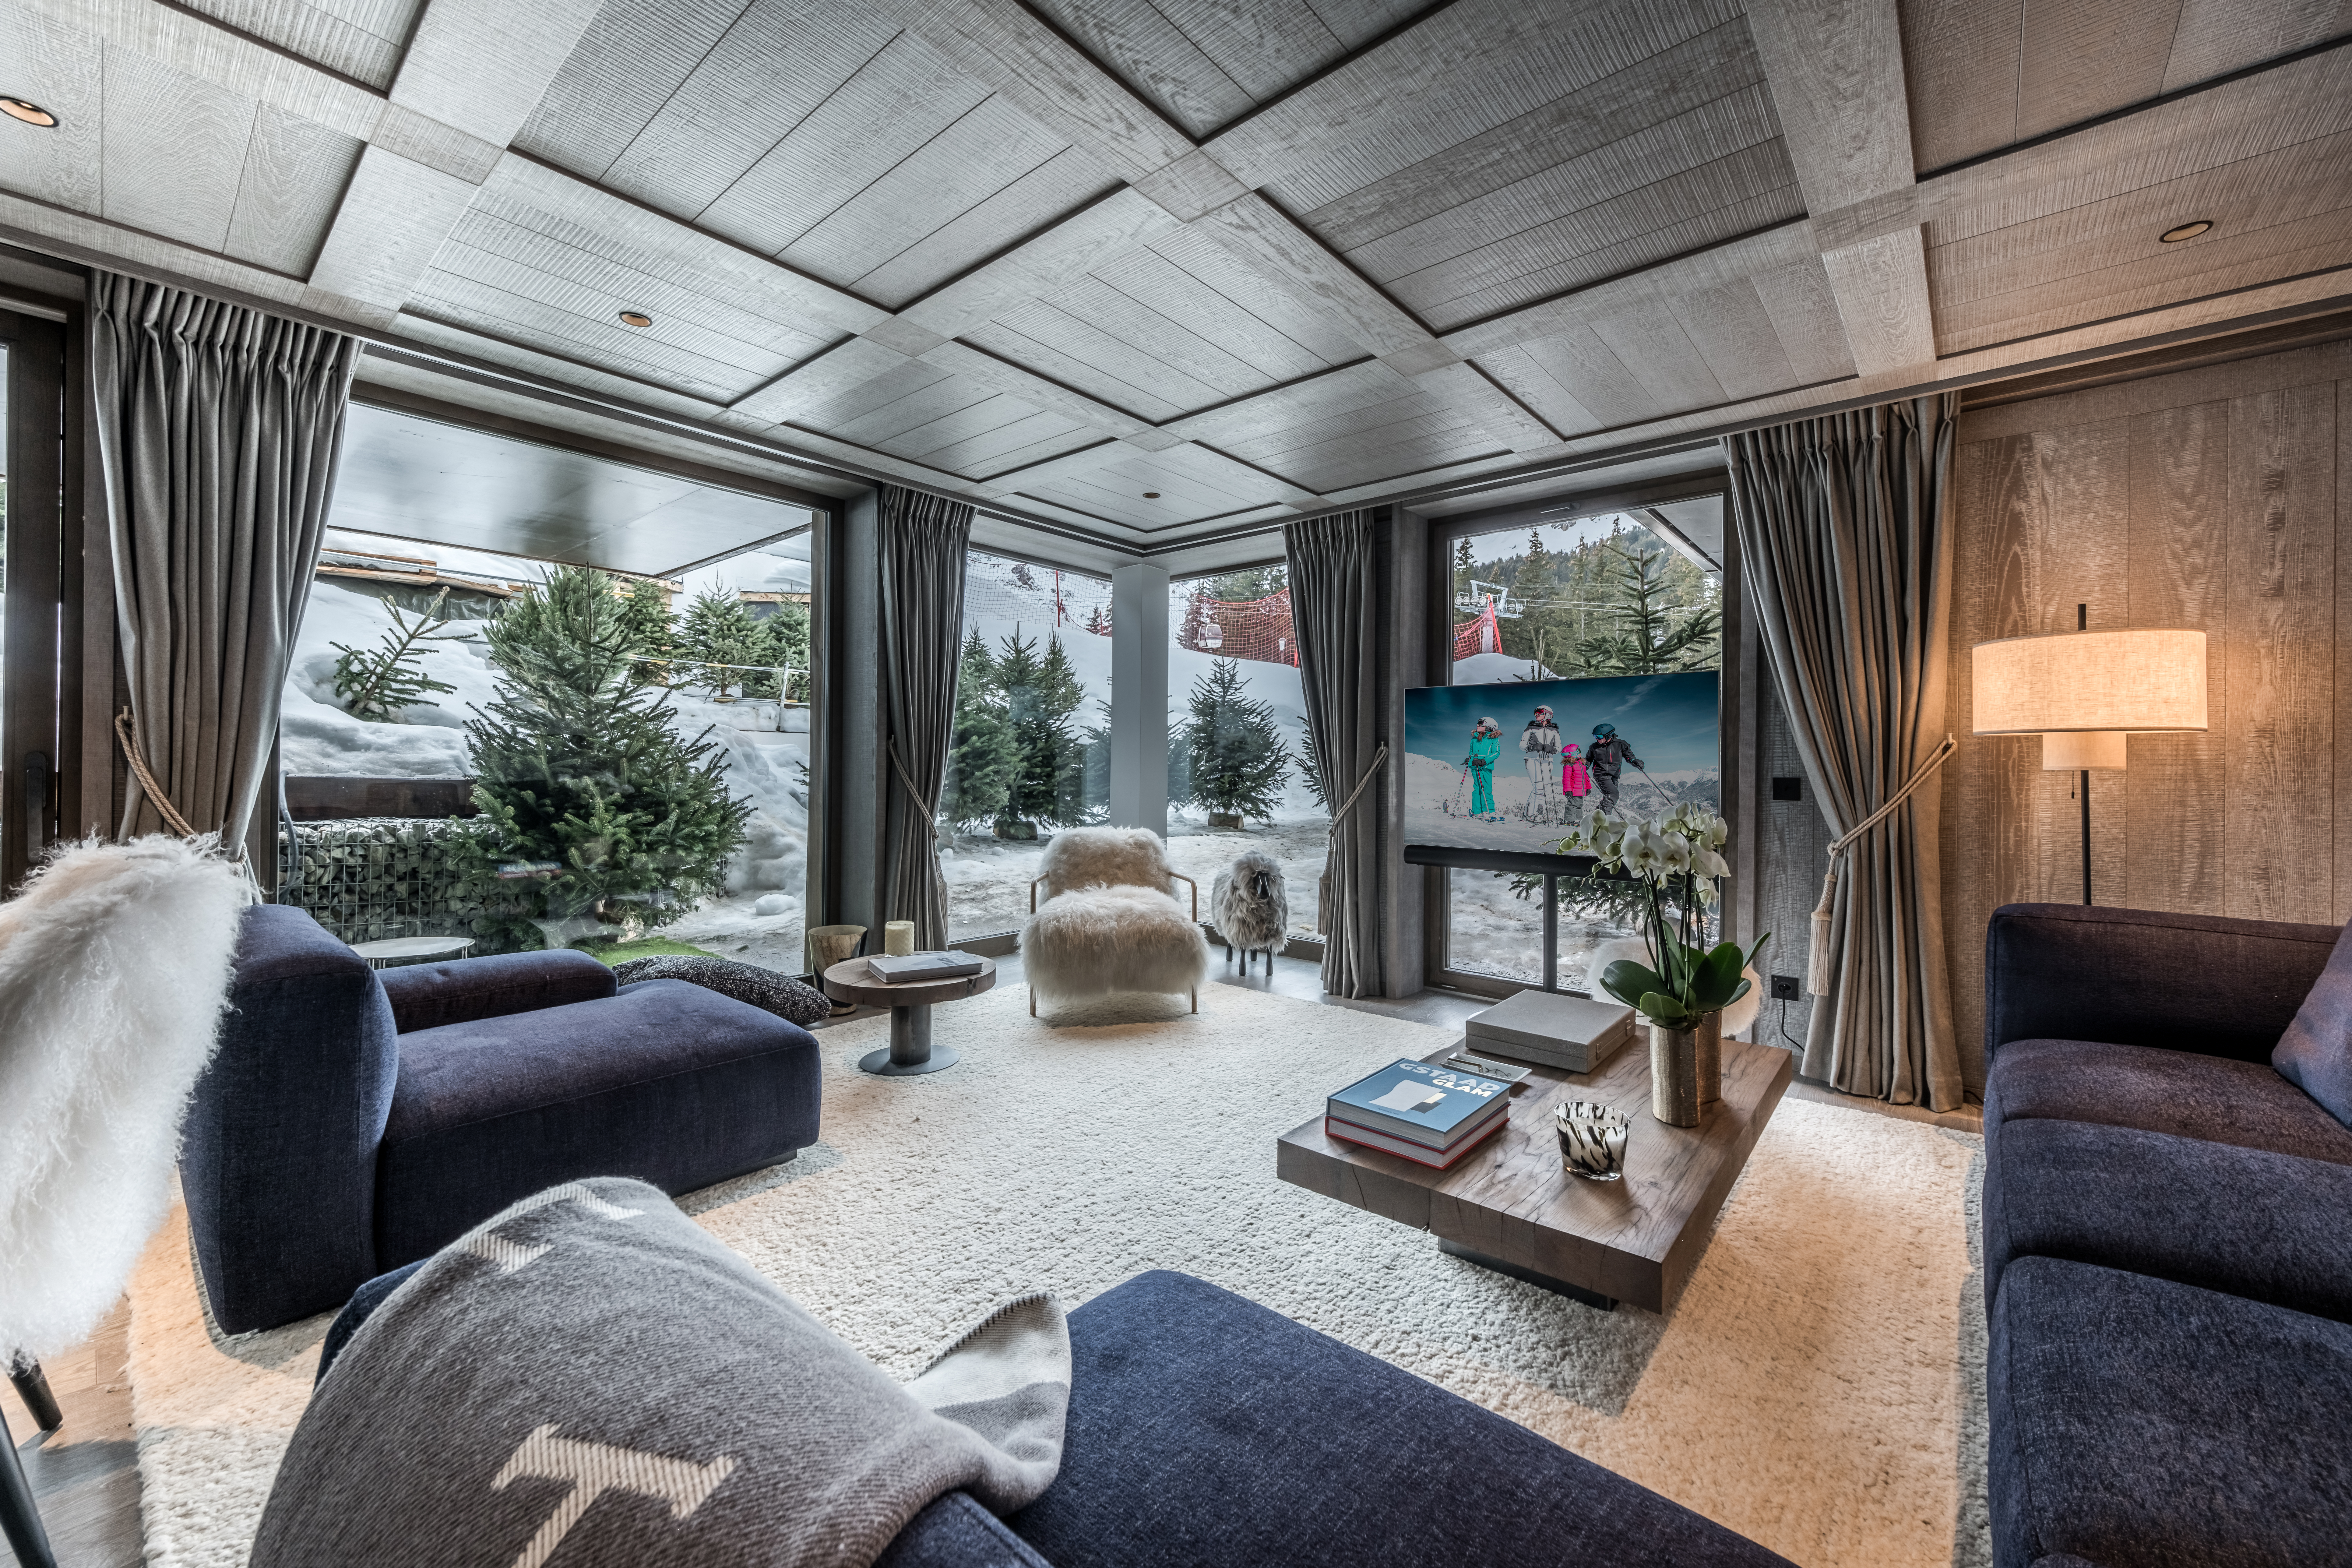 Property in Courchevel Accommodation in Courchevel